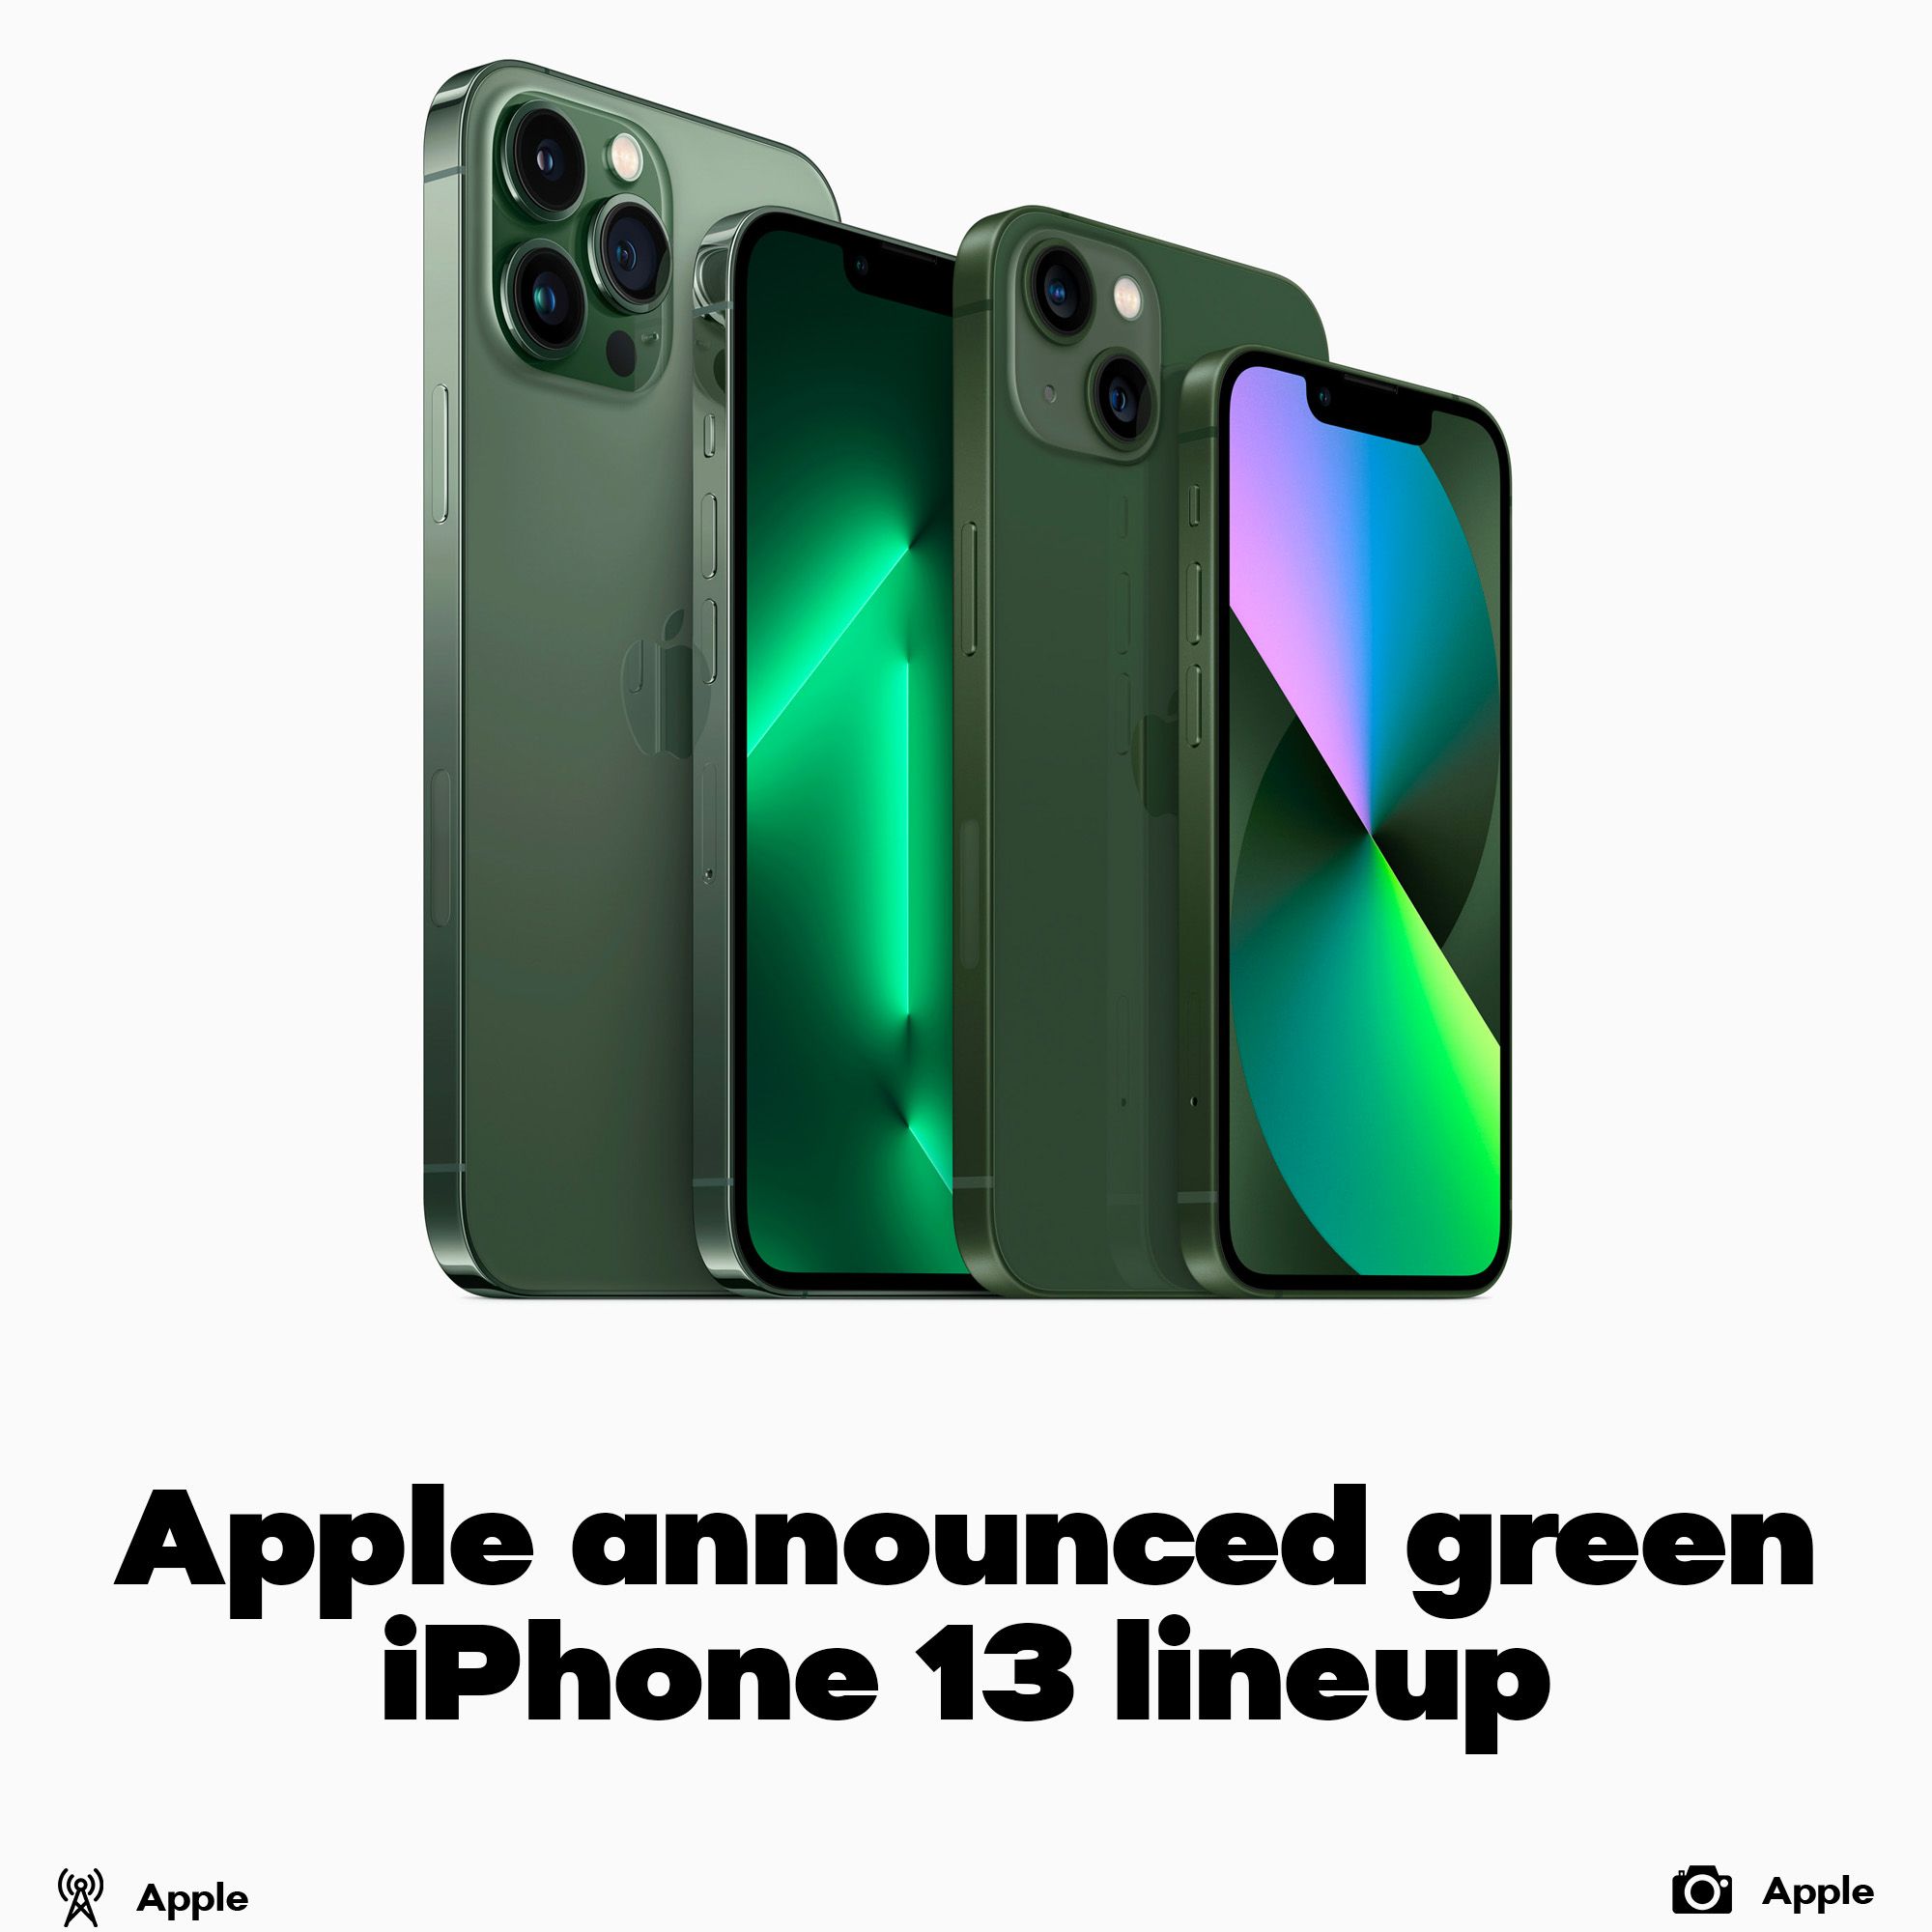 Apple introduced Green iPhone_13 lineup